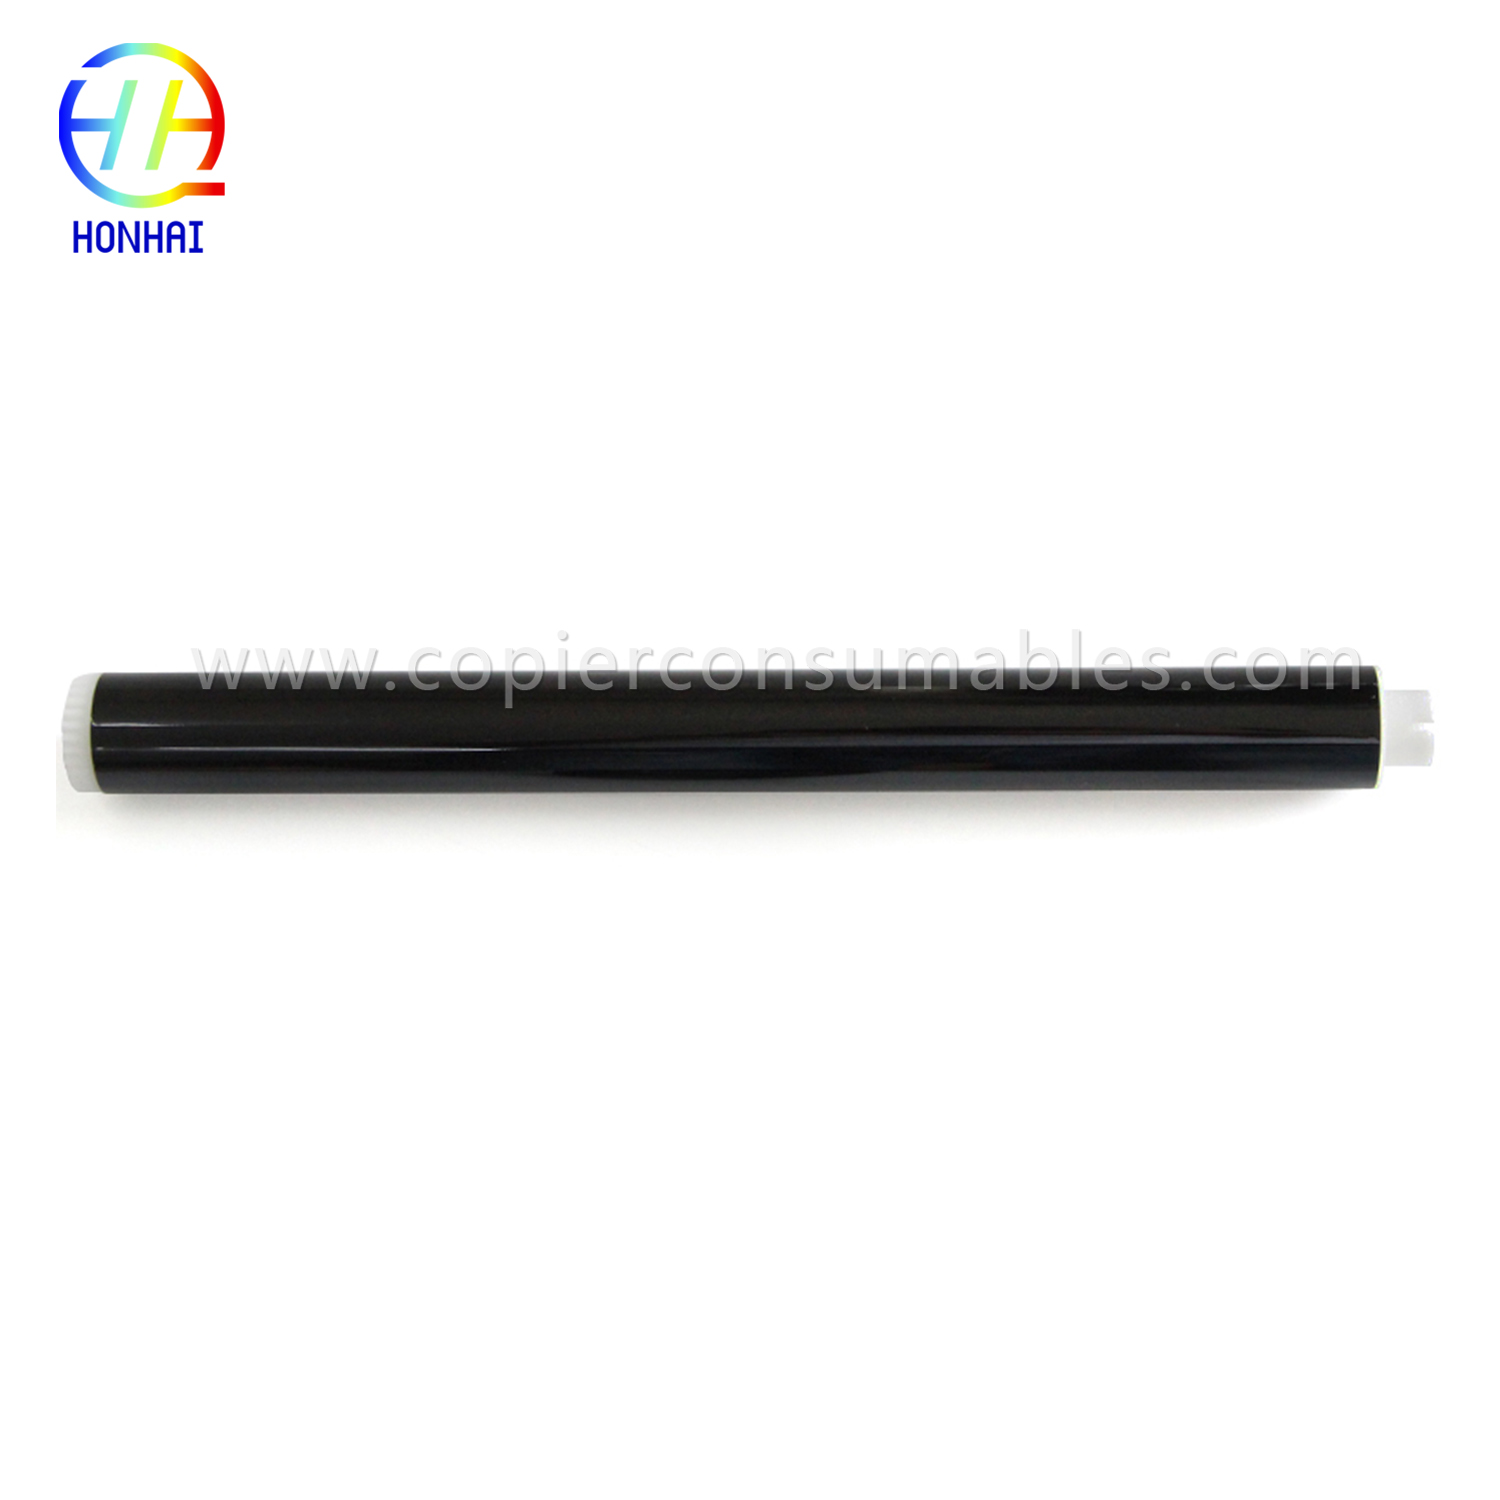 OPC Drum for Kyocera 1040 1060 1020 1025  (3)